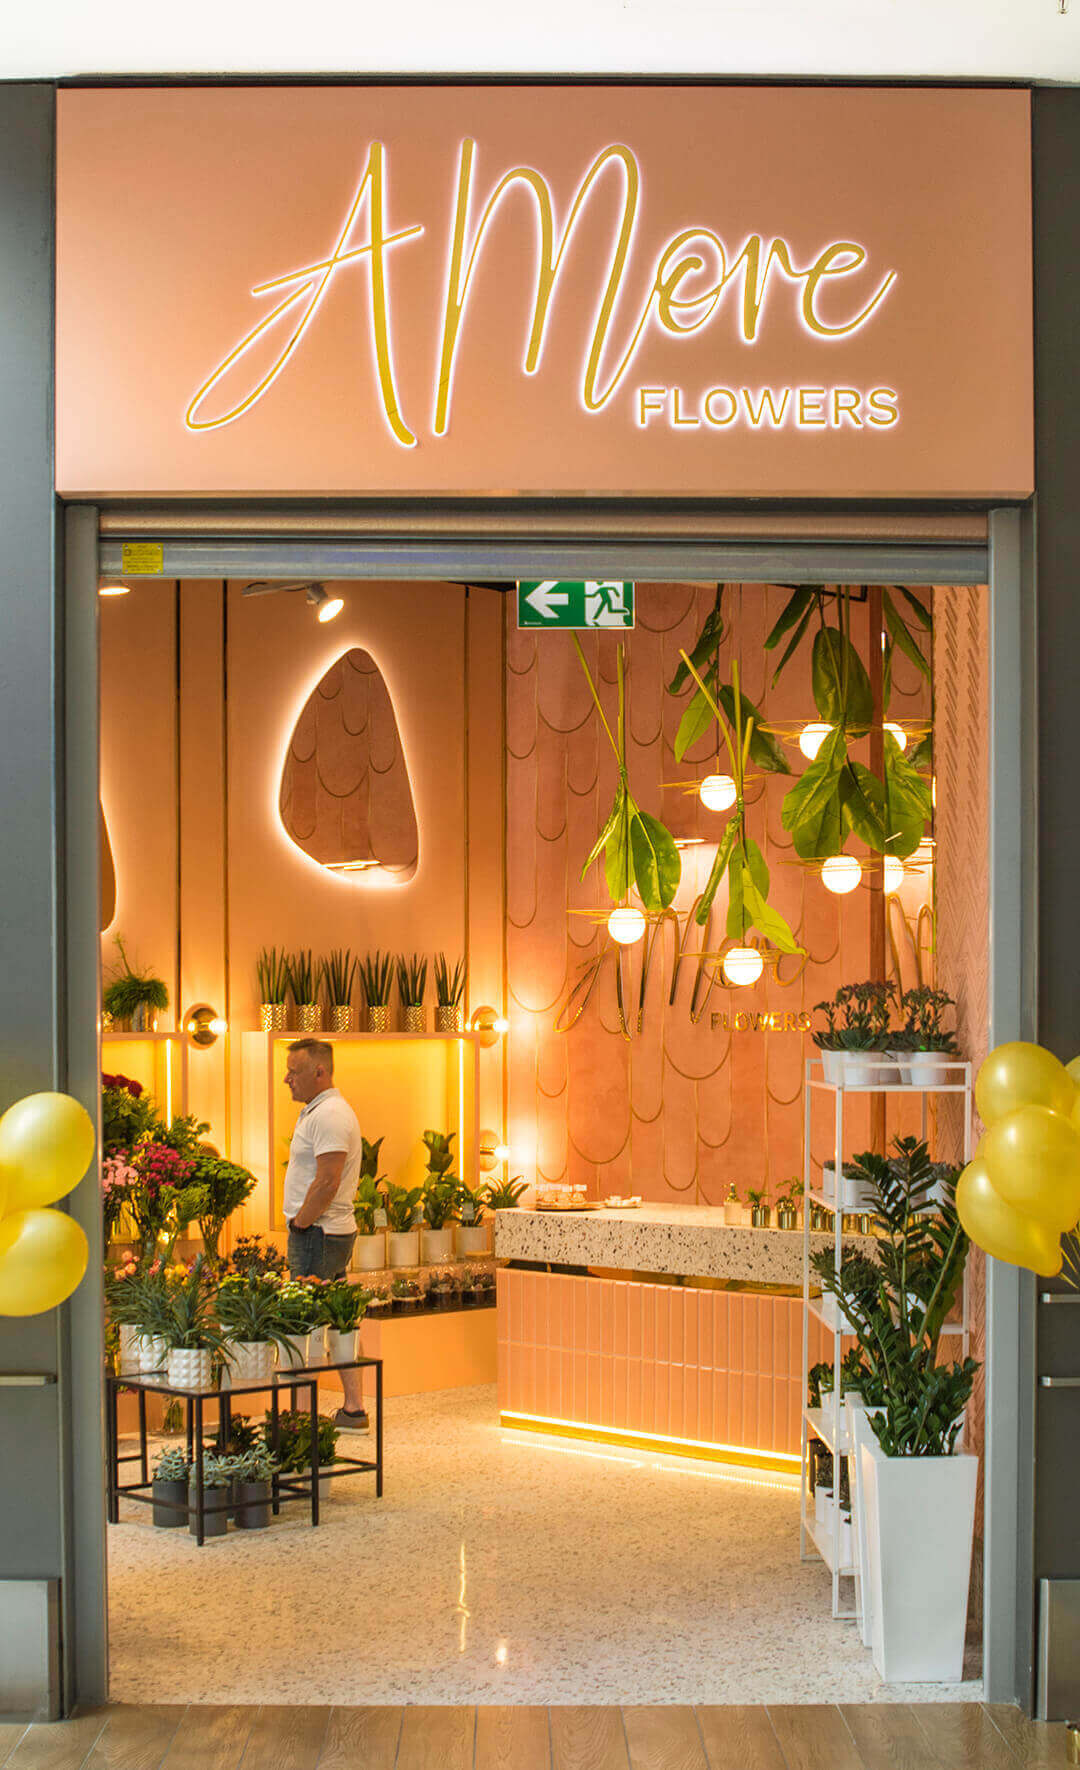 amore fiore amor flave - amore-flowers-casette-gdynia-riviera-casette-gold-letters-lit-coffer-casette-over-store-casette-over-the-morellow-florist-entrance (11) 